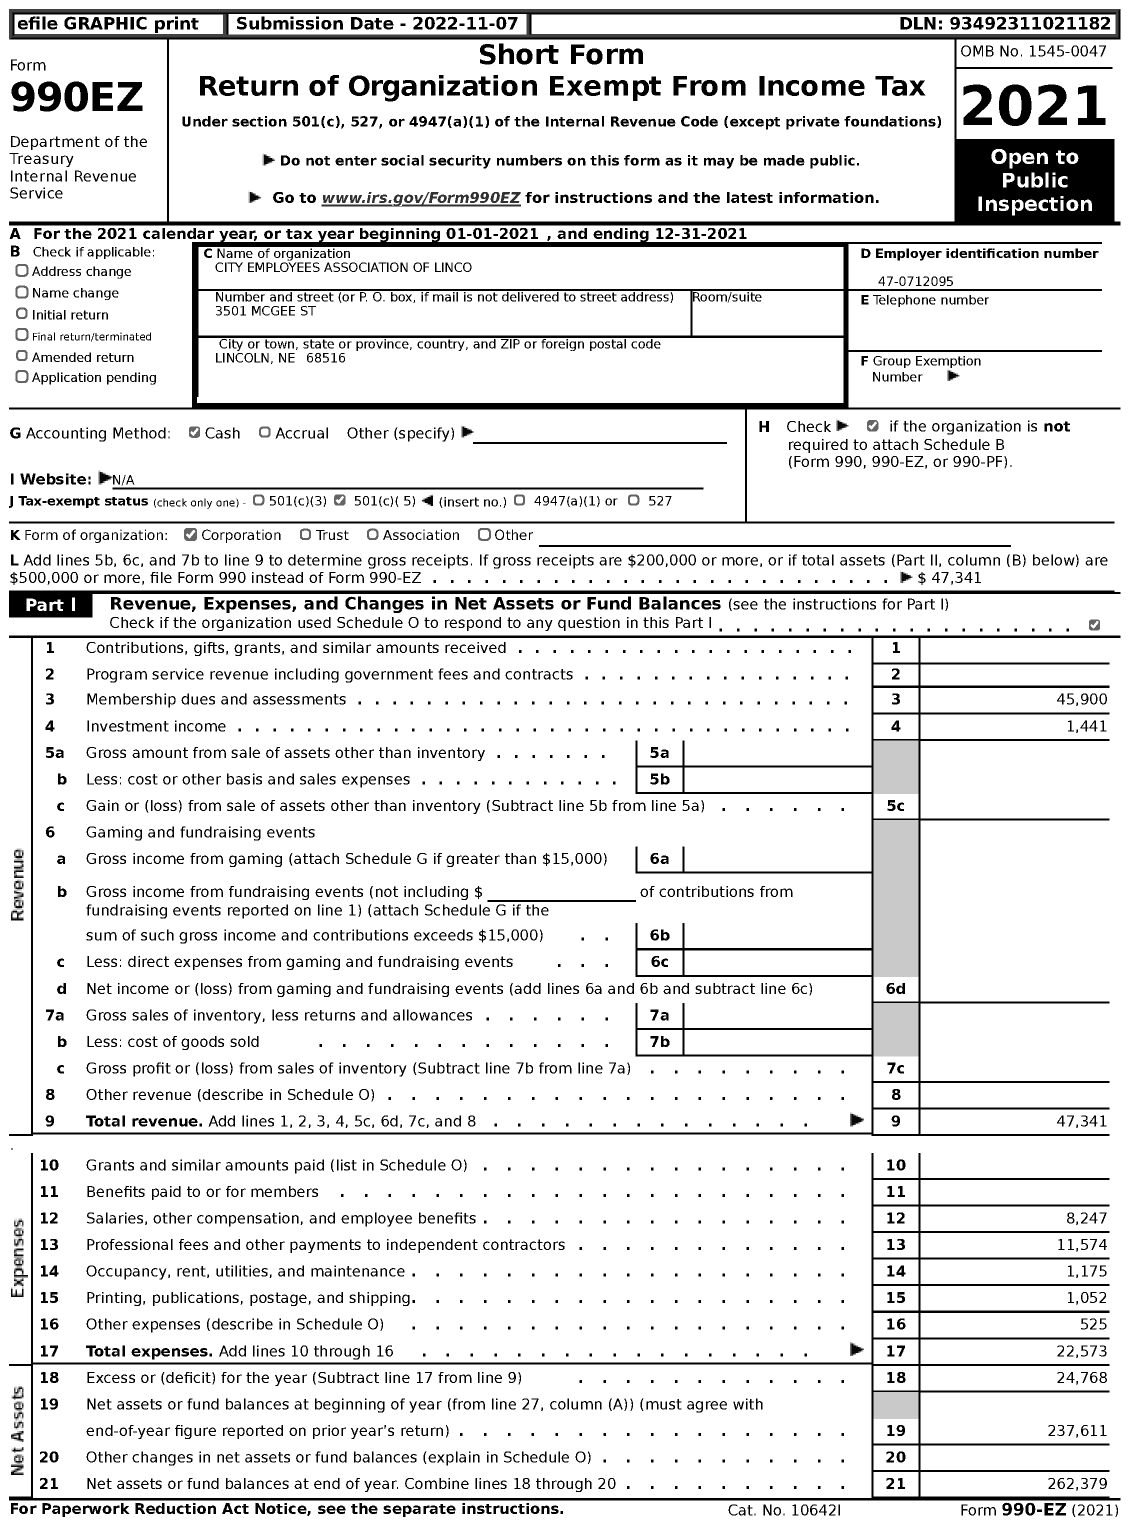 Image of first page of 2021 Form 990EZ for City Employees Association of Linco